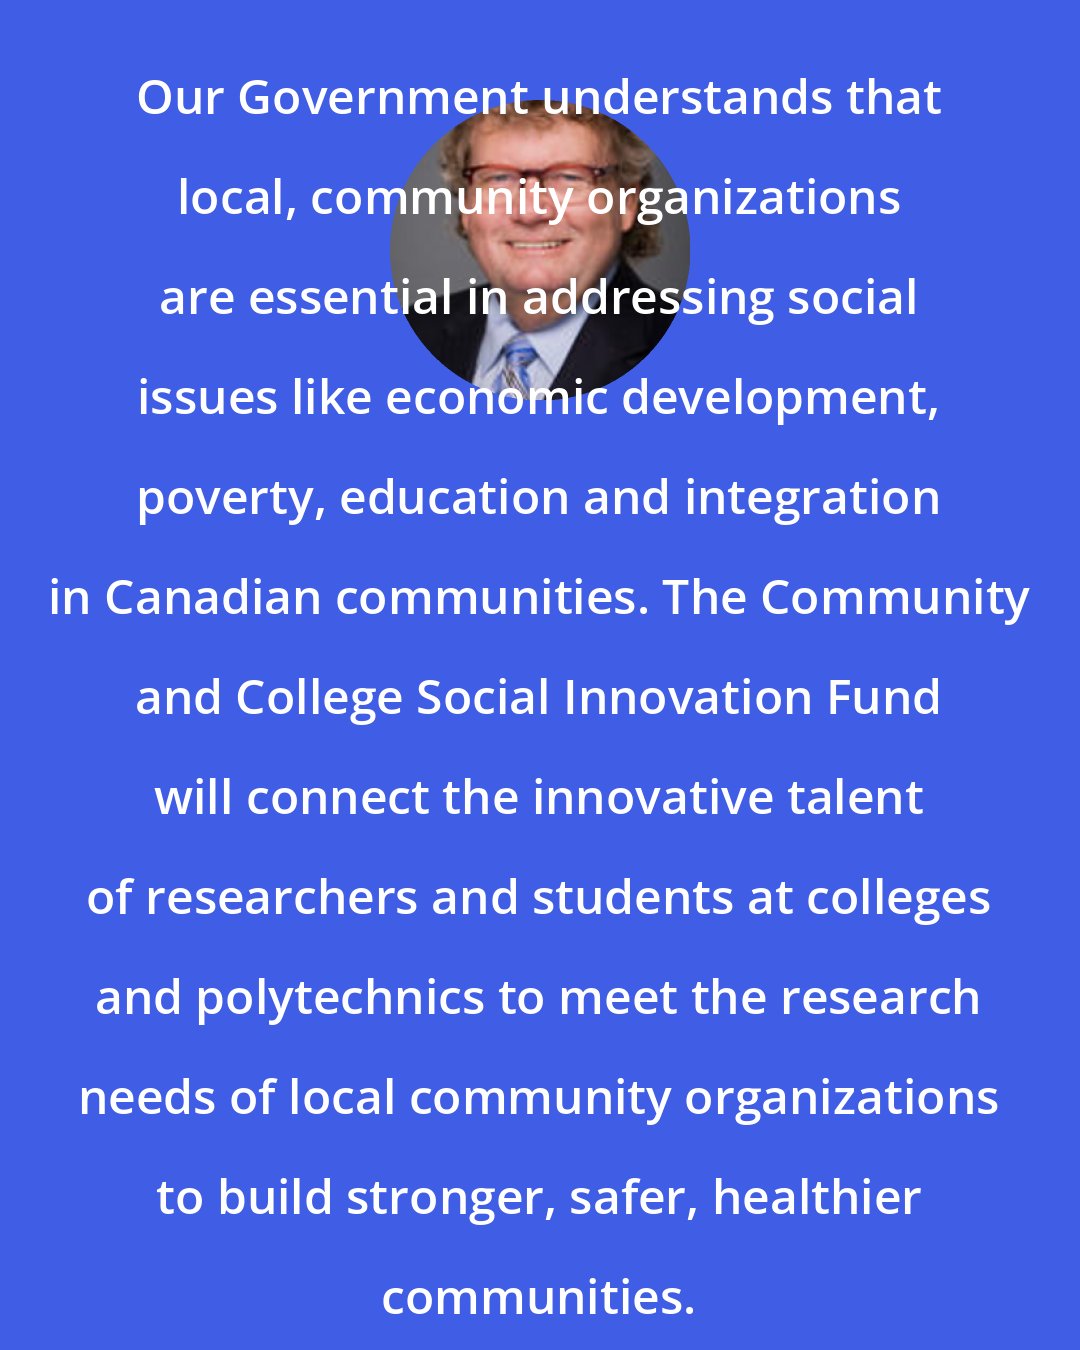 Ed Holder: Our Government understands that local, community organizations are essential in addressing social issues like economic development, poverty, education and integration in Canadian communities. The Community and College Social Innovation Fund will connect the innovative talent of researchers and students at colleges and polytechnics to meet the research needs of local community organizations to build stronger, safer, healthier communities.